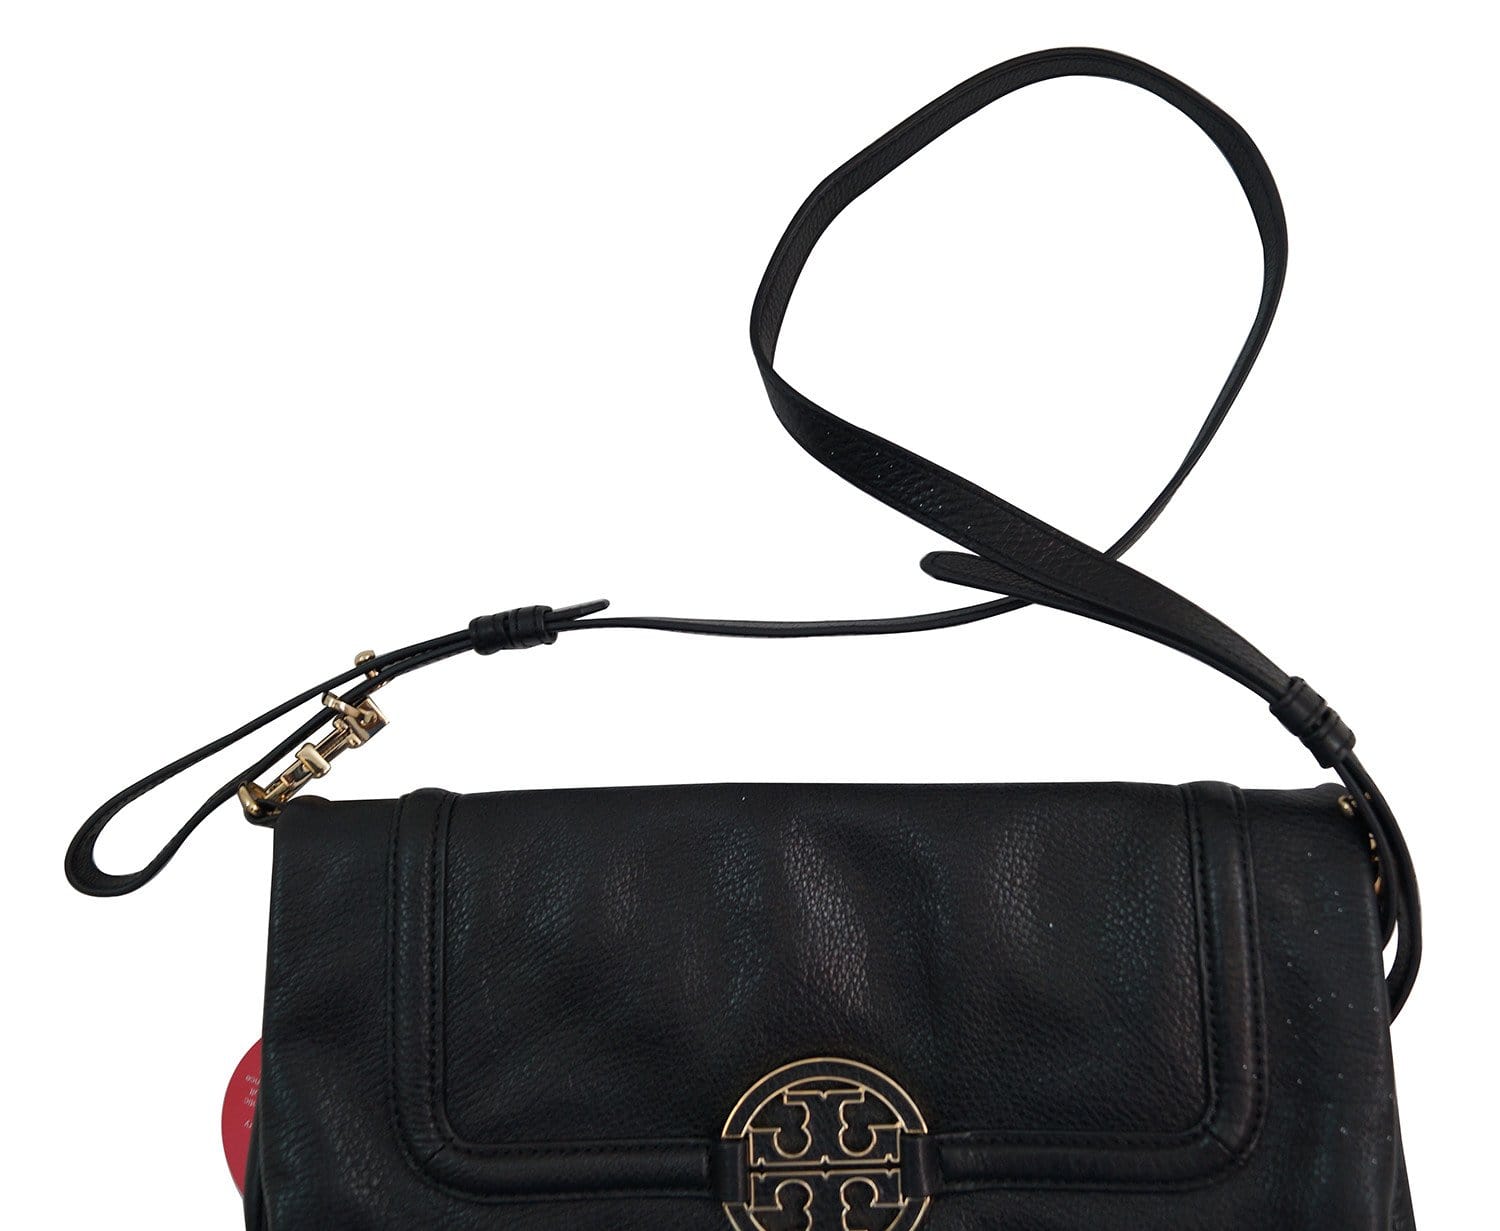 Tory Burch T Navy and Stacked Book Black / Tan Leather / Canvas Shoulder Bag